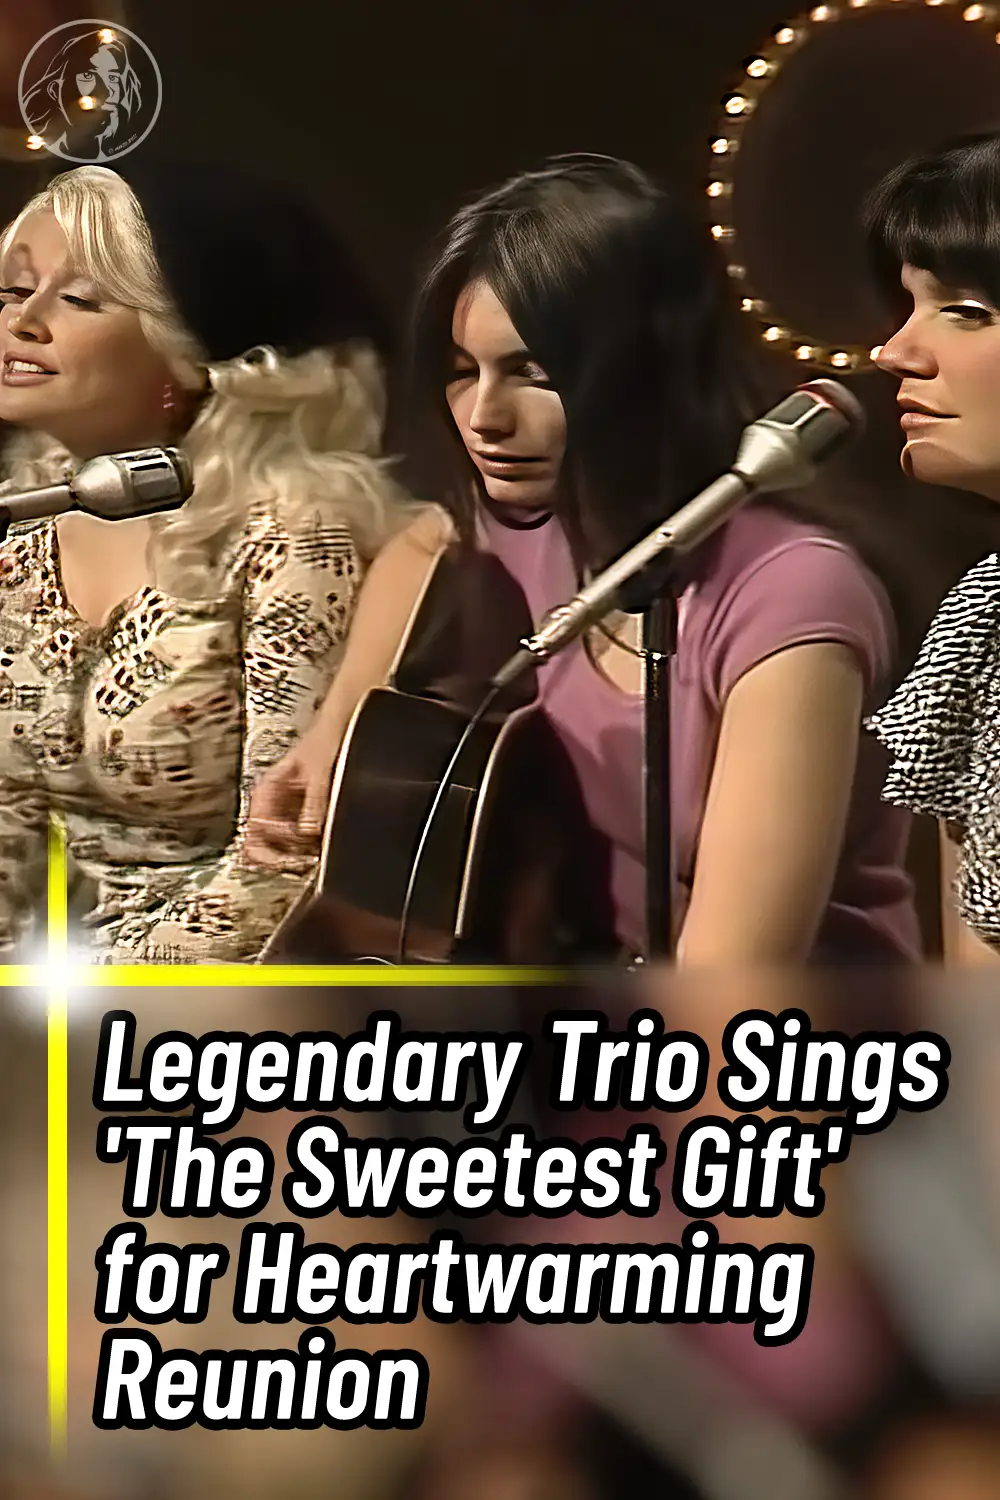 Legendary Trio Sings \'The Sweetest Gift\' for Heartwarming Reunion